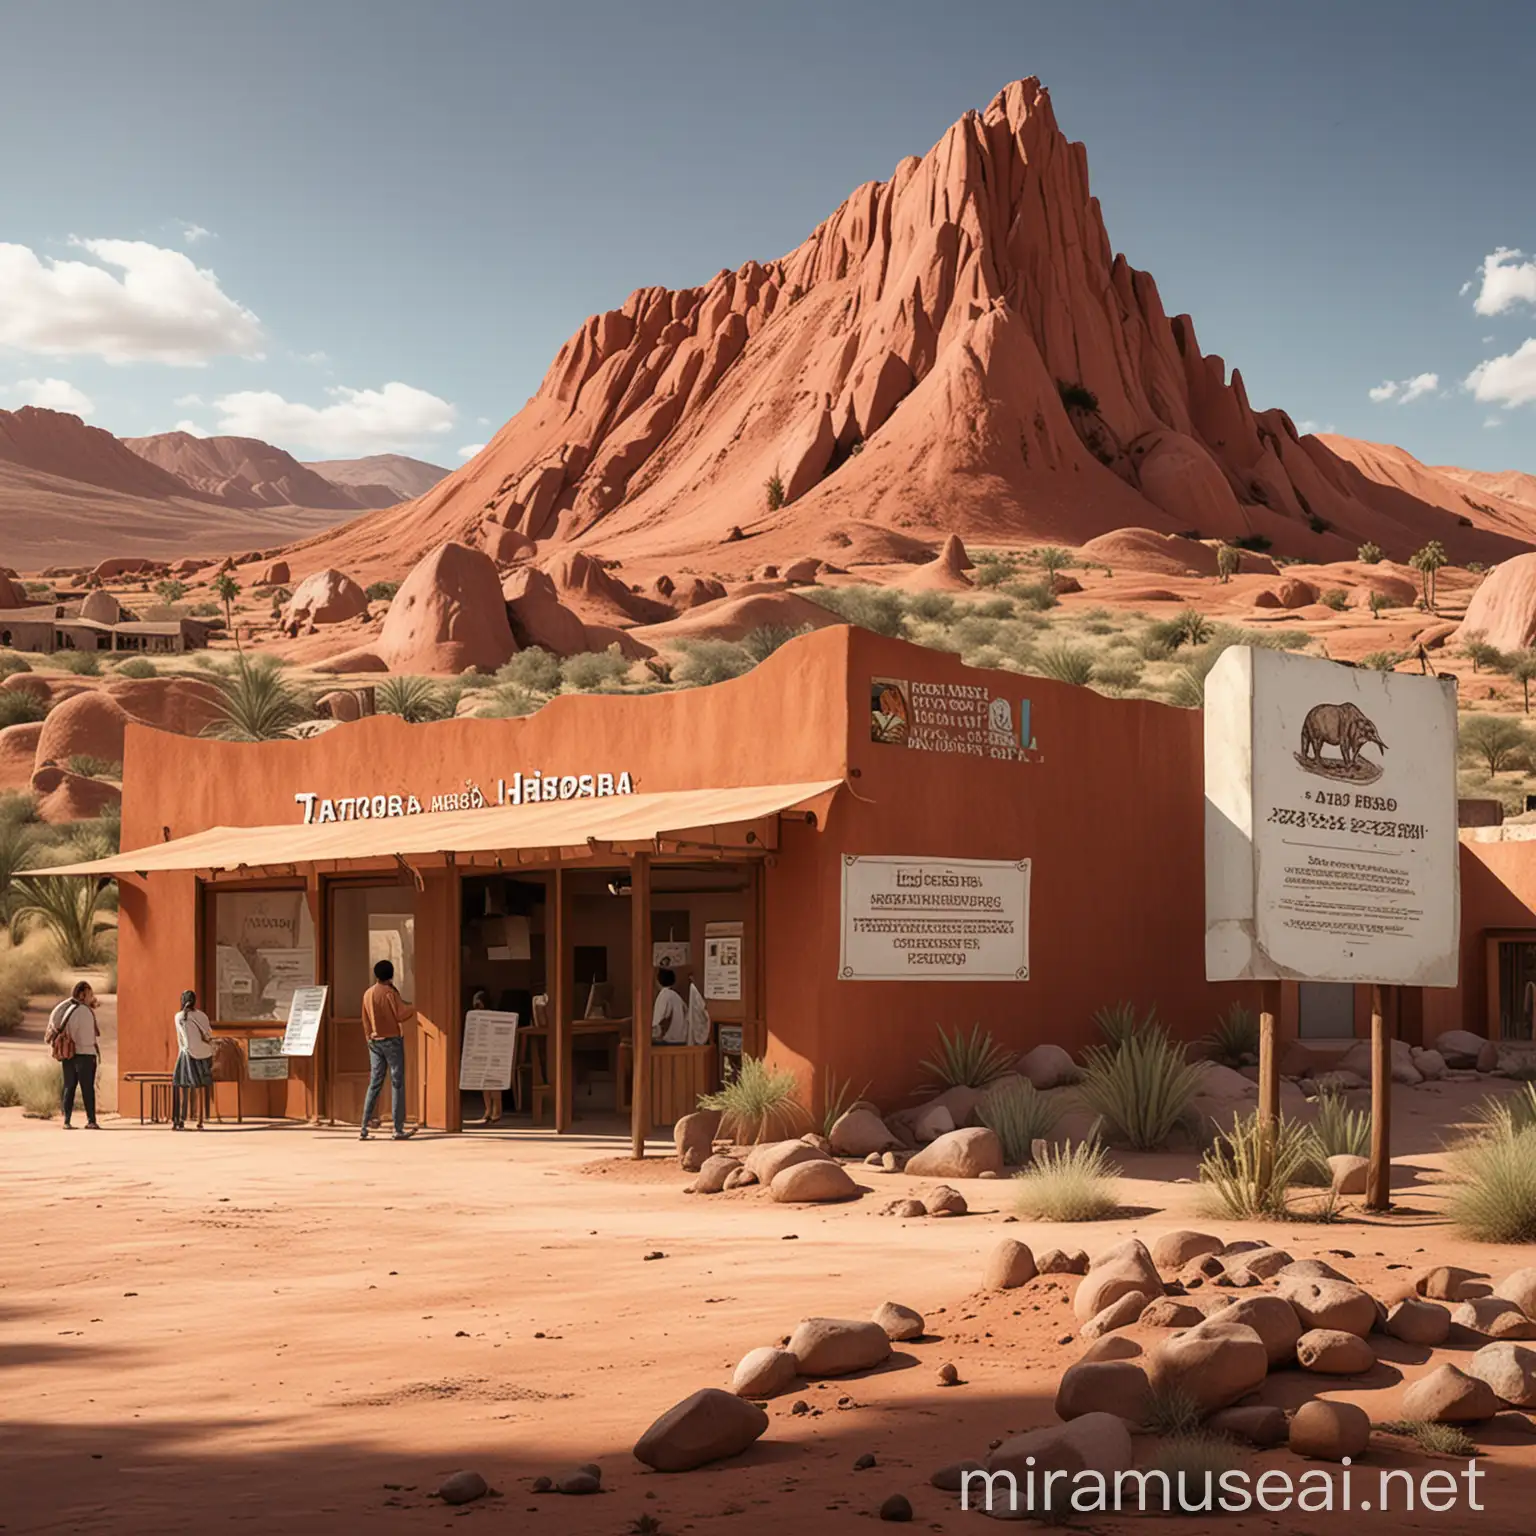 Create an illustration representing the Tatacoa Natural History Museum's new policy of requesting advance payment. The image should depict the museum's exterior with a welcoming banner that reads 'Advance Payment Required'. Include elements like a ticket booth or reception area where visitors are seen paying in advance, with a background showcasing the desert landscape typical of Tatacoa